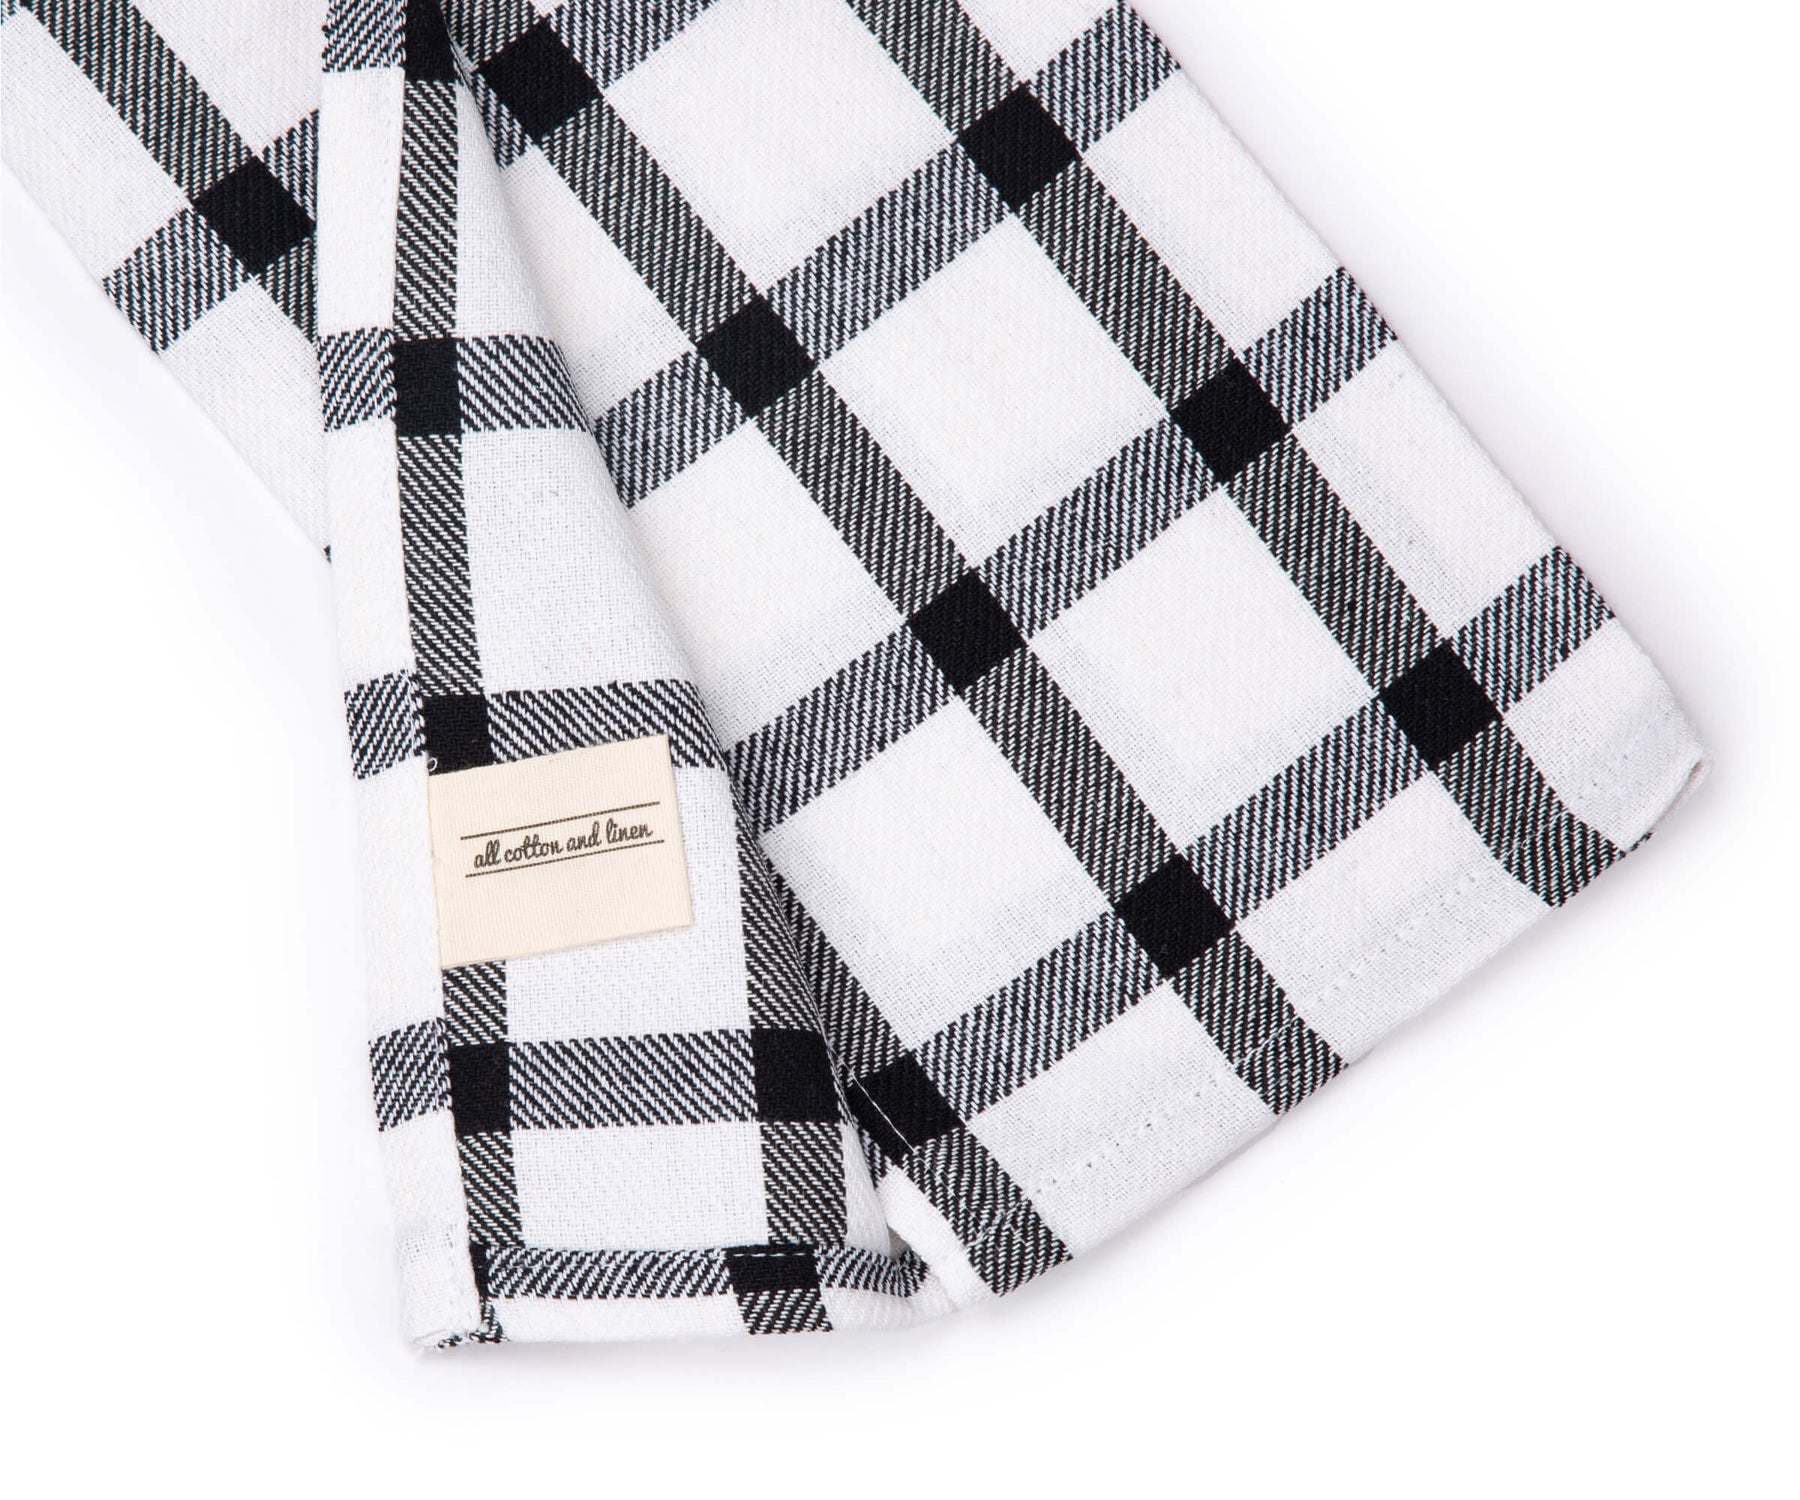 Monochrome checkered dish towel with visible brand label